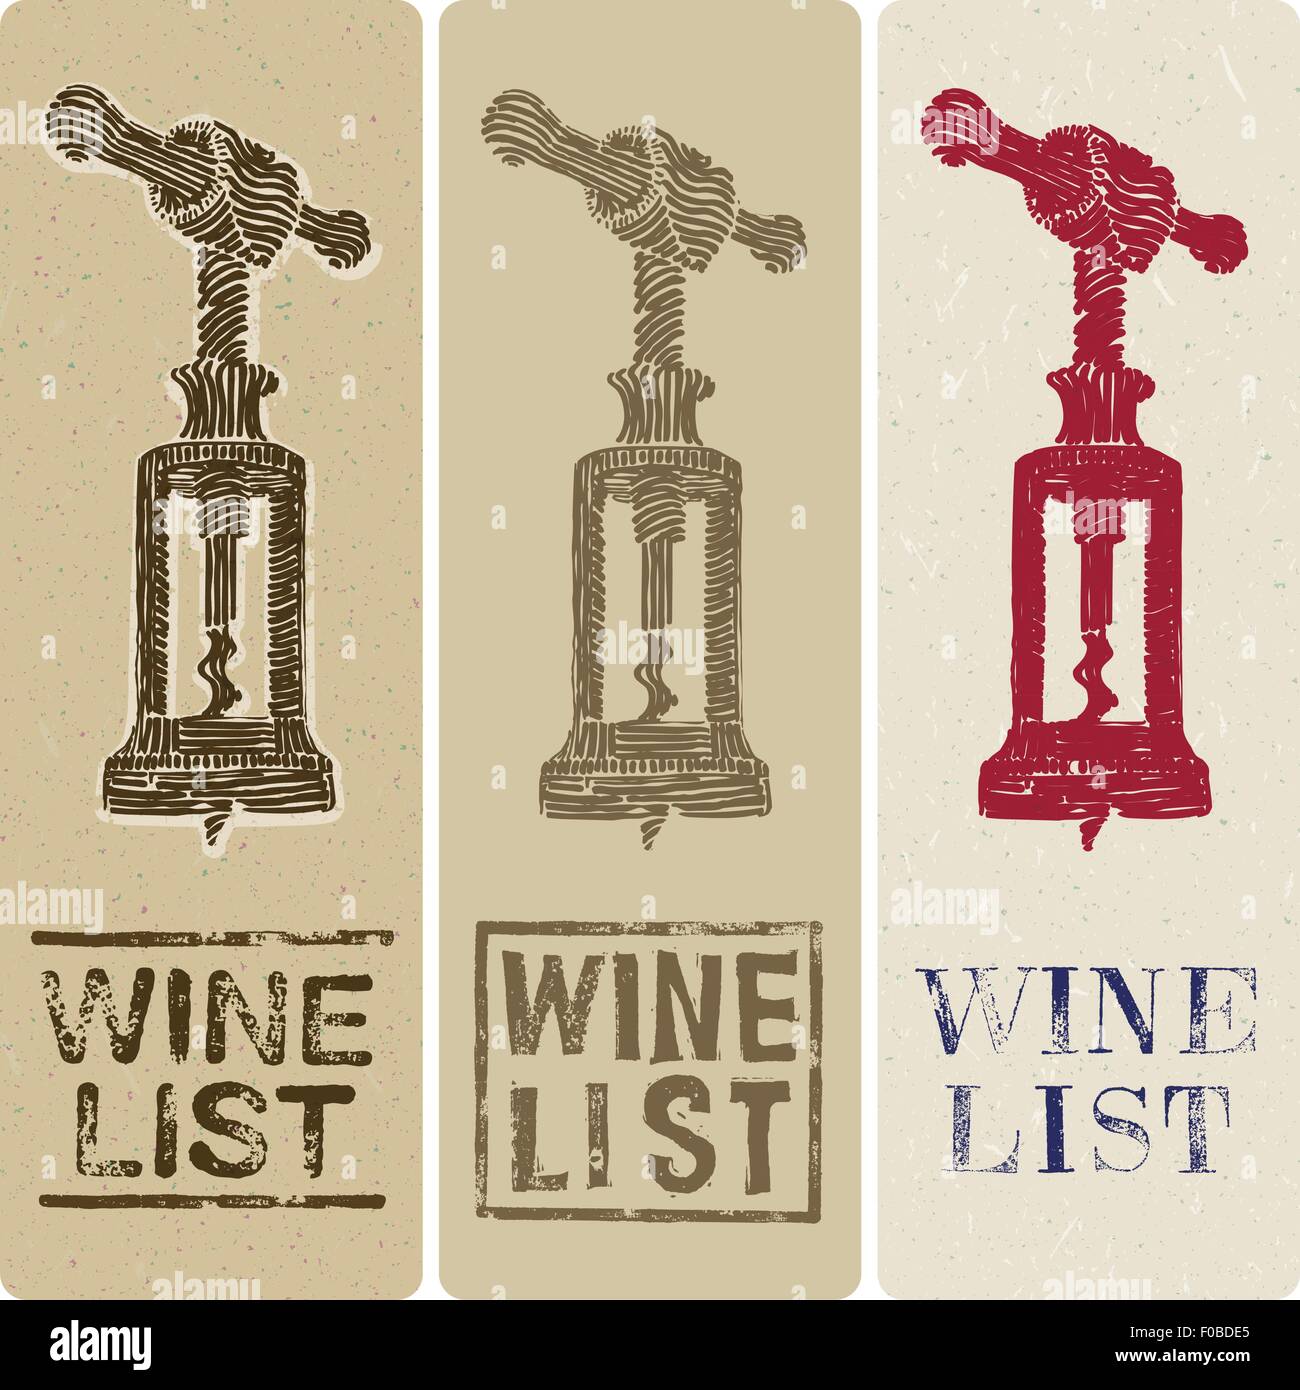 wine list slim grunge covers on recycled paper background Stock Vector